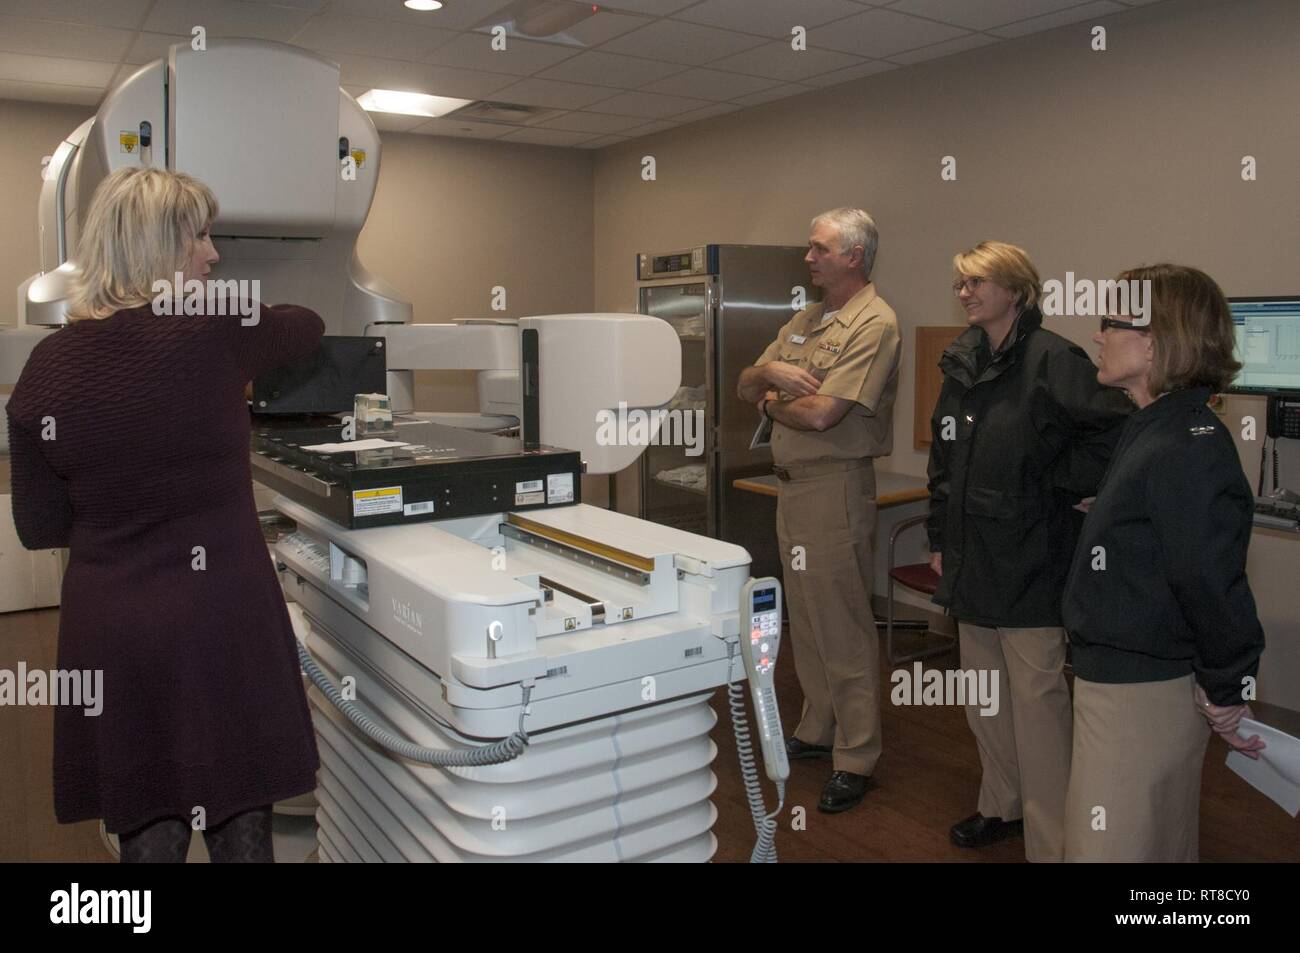 Portsmouth, Va. Kristie Ledman, a radiation therapist in Naval Medical Center Portsmouth’s (NMCP) Radiation Oncology Division, demonstrates operation of the TrueBeam linear accelerator to Capt. Christopher Culp, NMCP’s commanding officer; Rear Adm. Anne Swap, commander, Navy Medicine East; and Capt. Carolyn Rice, NMCP’s executive officer. The Radiation Oncology Division debuted a new Varian TrueBeam linear accelerator during the Jan. 25 open house and held a ribbon cutting for the $4.5-million machine that is revolutionary in the way it treats cancerous and benign tumors. Stock Photo